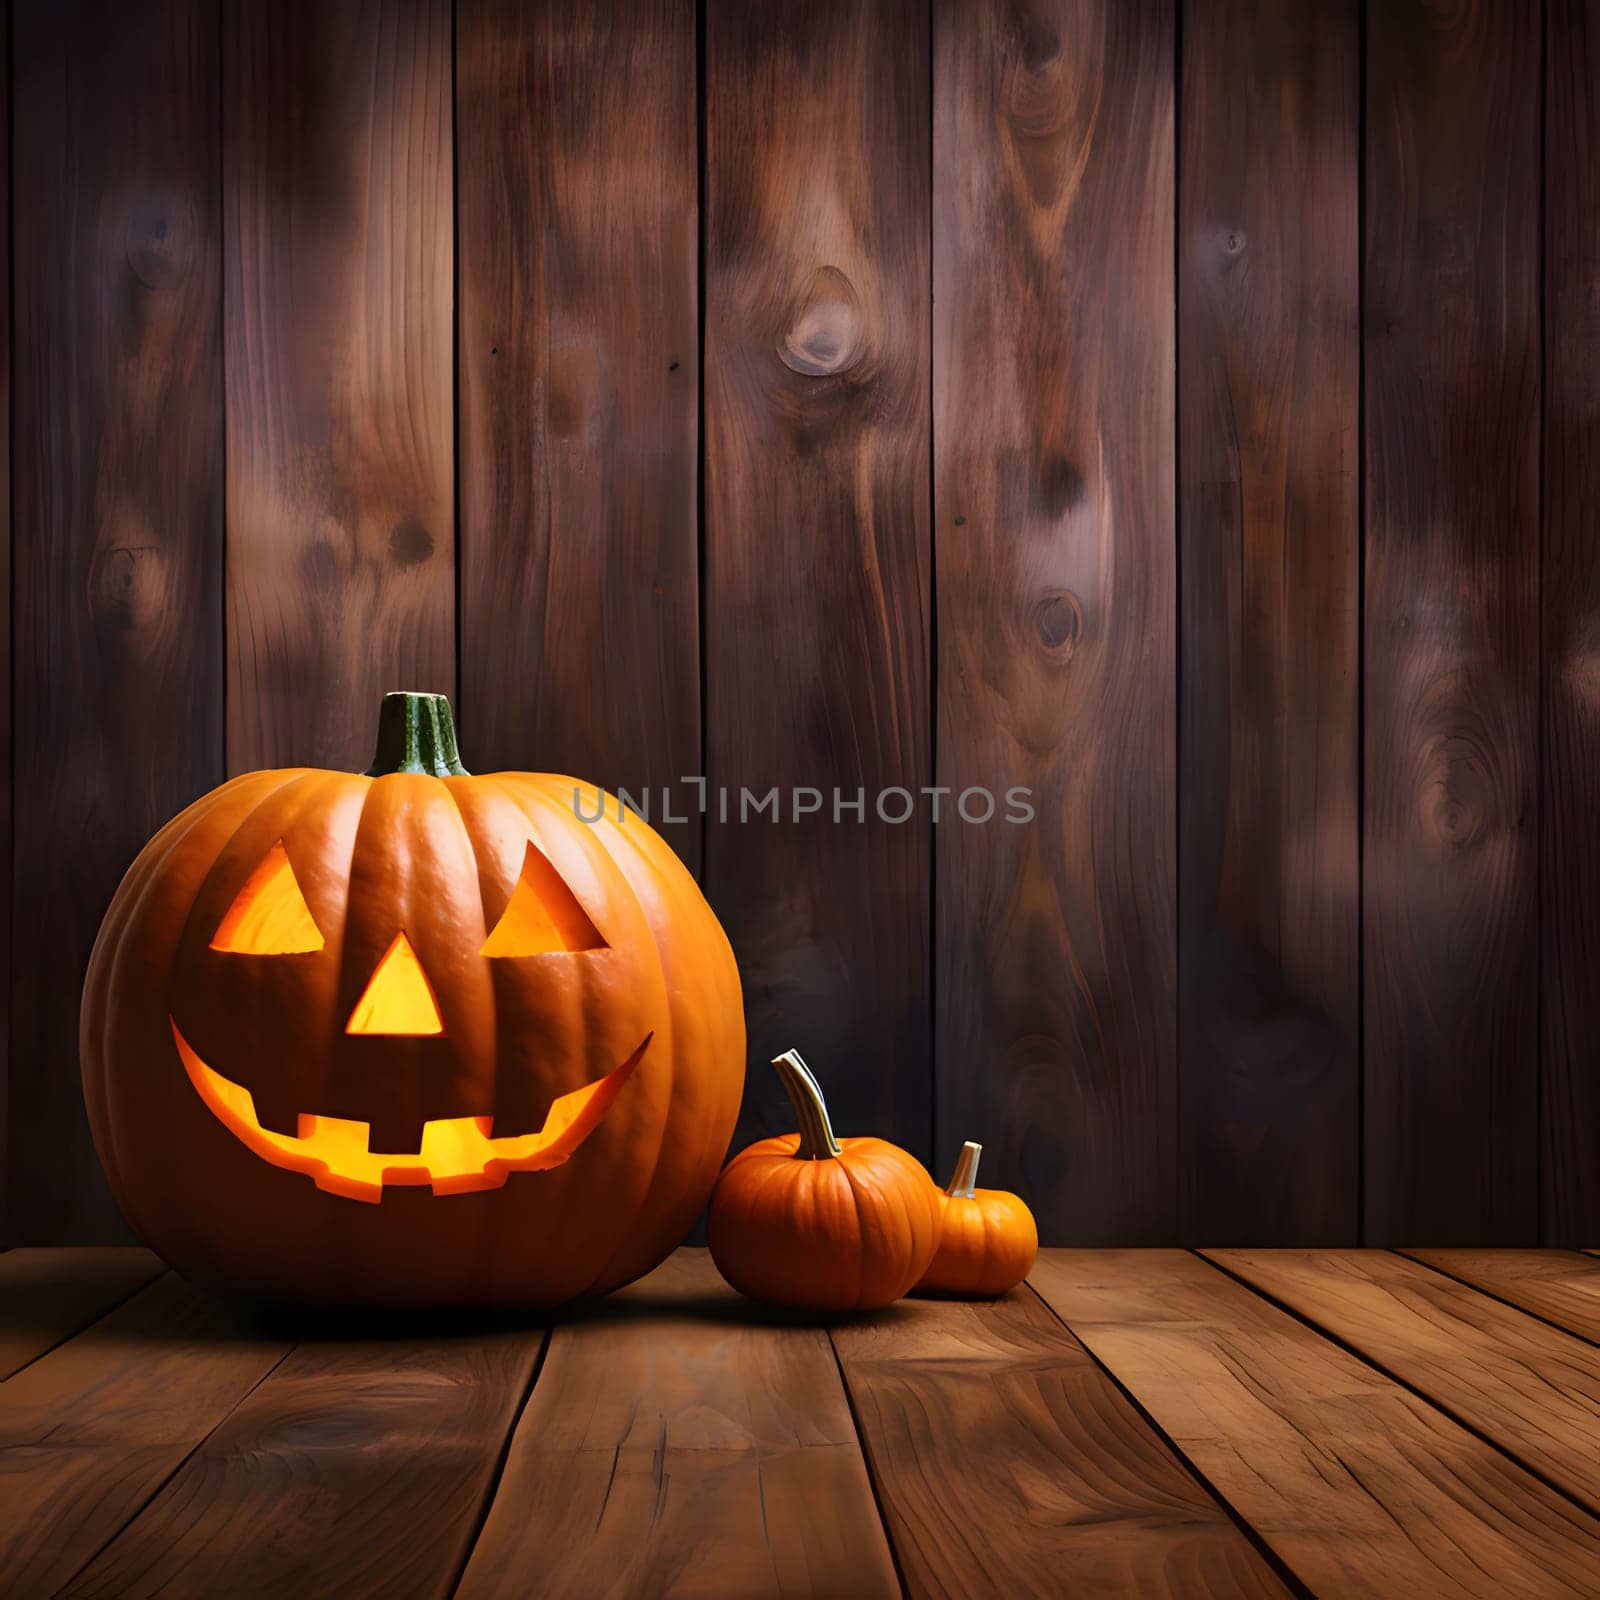 Elegantly arranged small pumpkins and one large jack-o-lantern glowing against wooden boards, a banner and space for your own content, a Halloween image. Atmosphere of darkness.